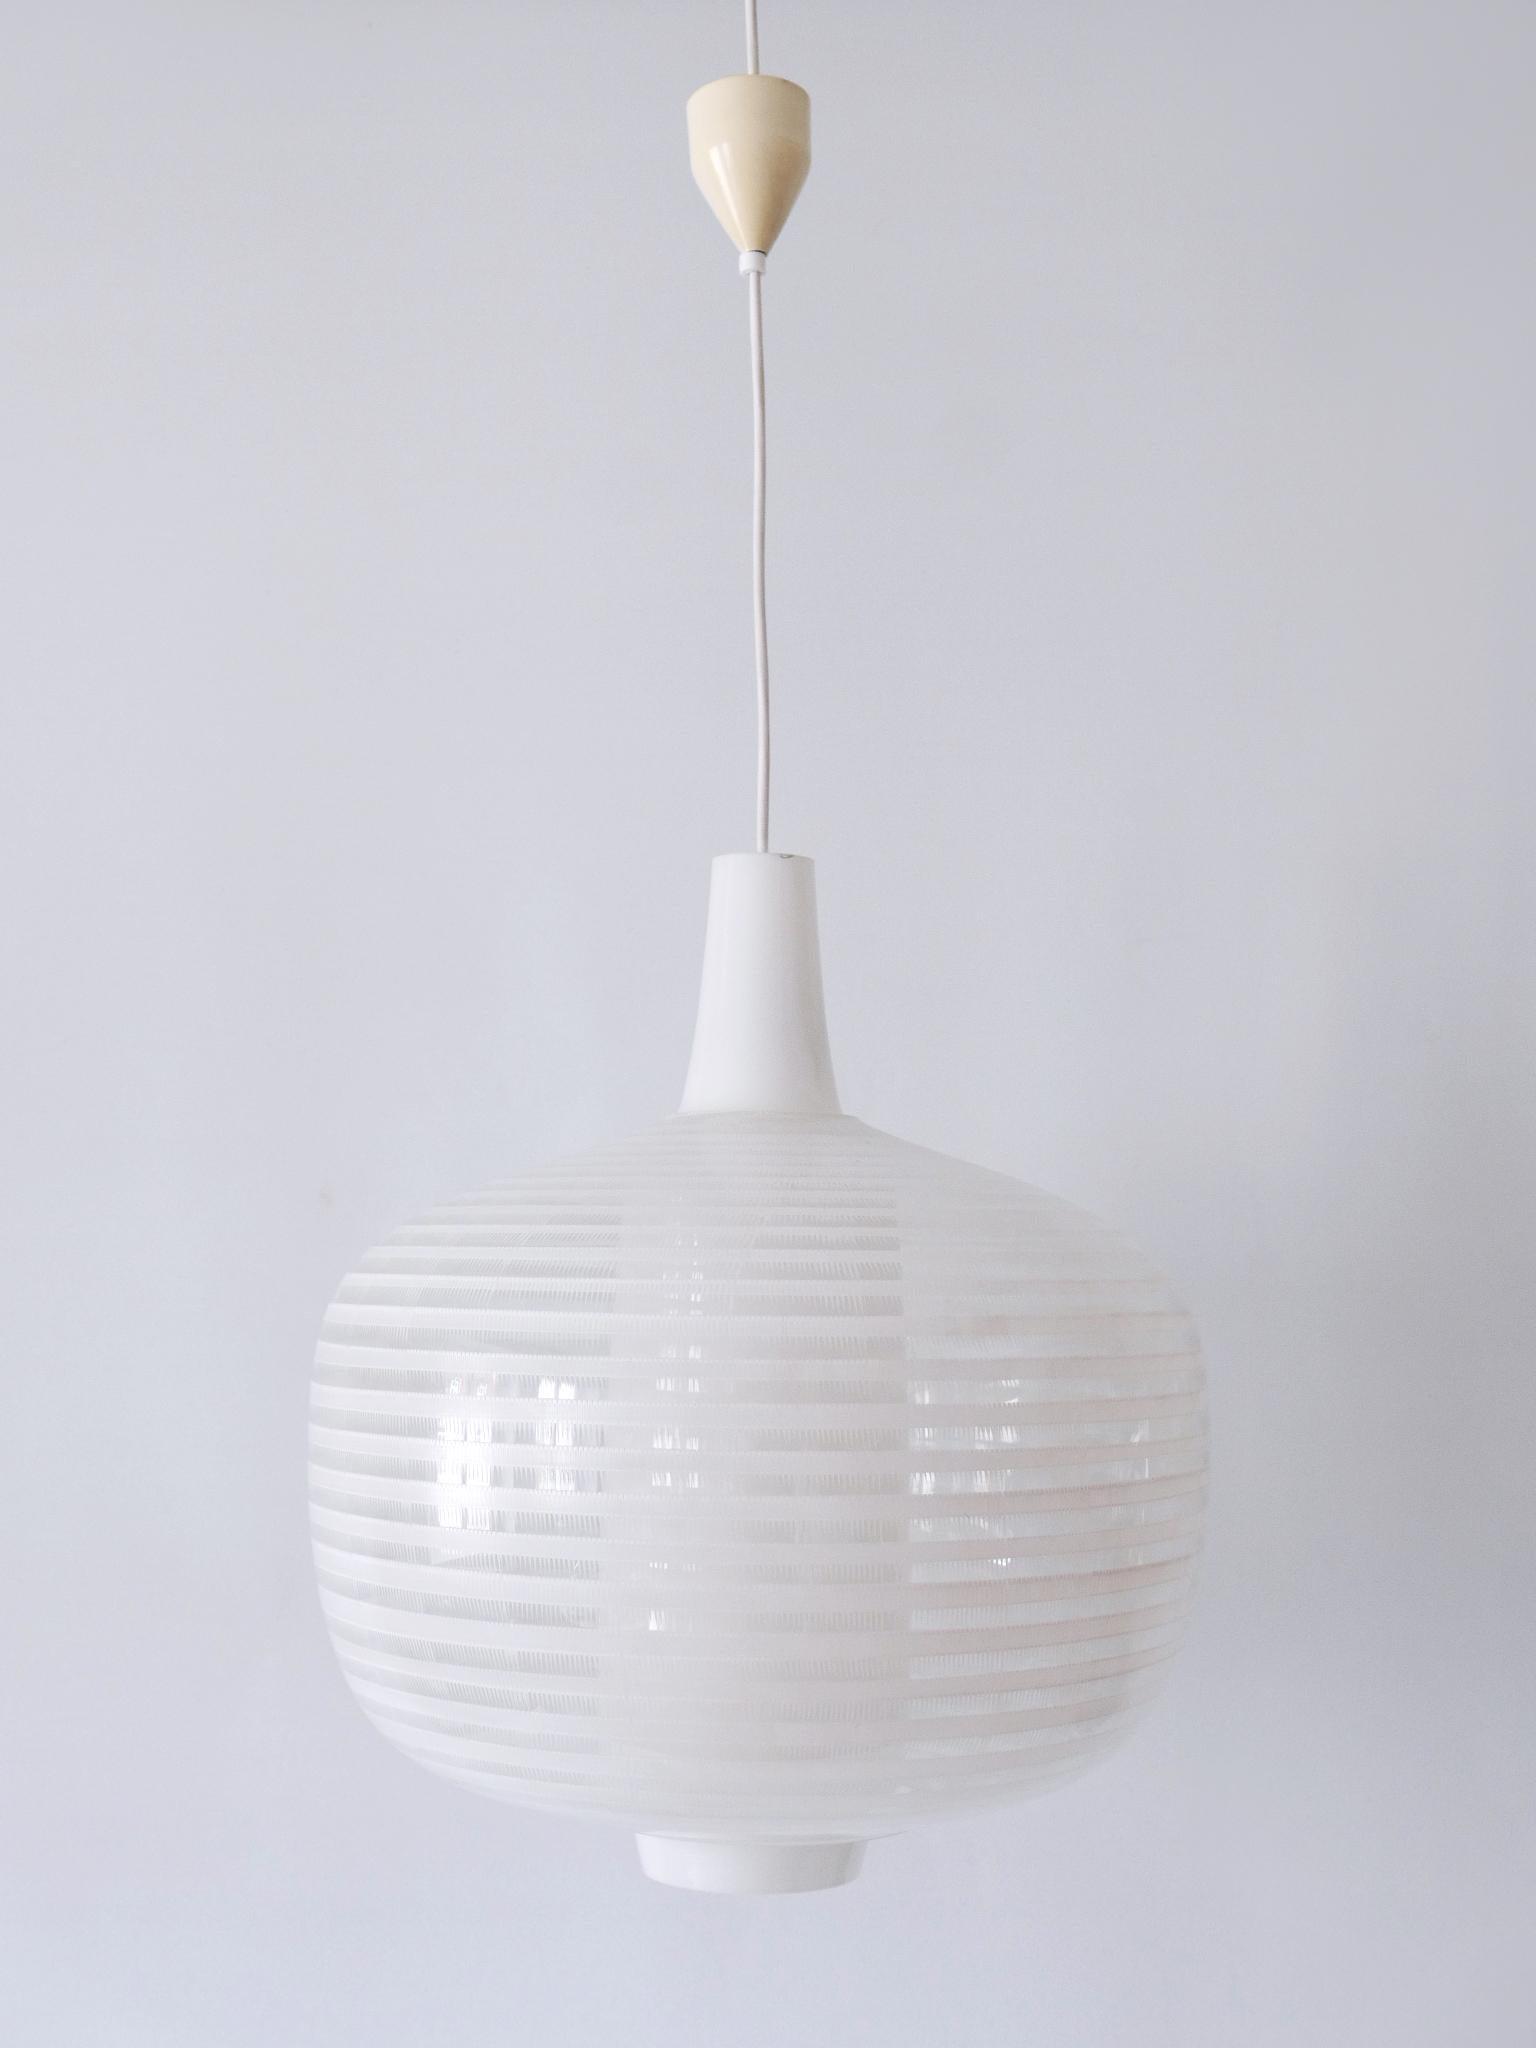 Rare & Large Mid-Century Modern Pendant Lamp Napoli by Aloys F. Gangkofner 1957 In Good Condition For Sale In Munich, DE